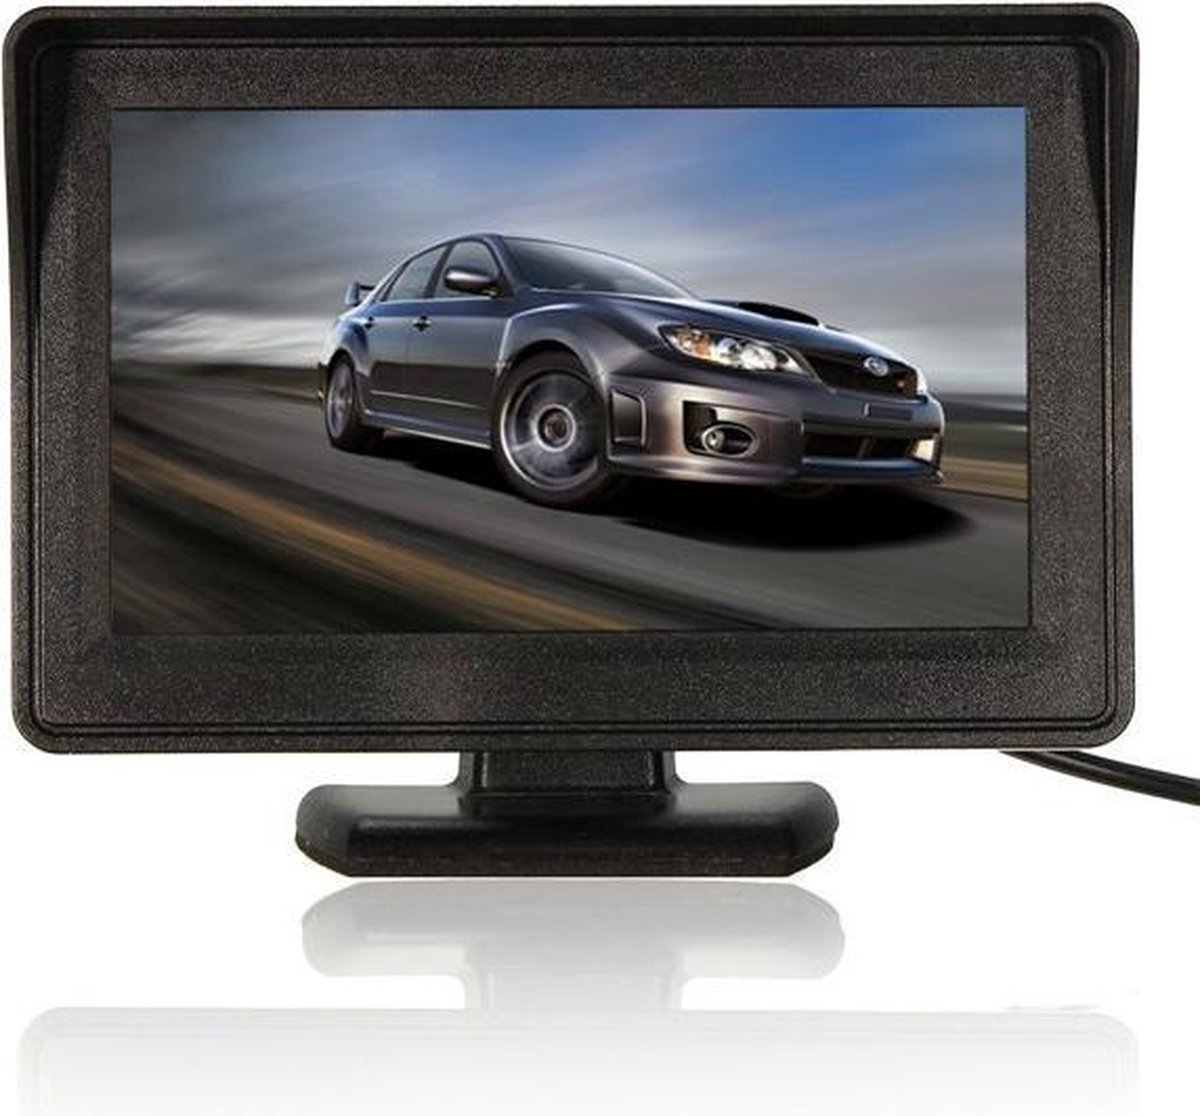 Mini Monitor for Car Car Rear-view Mirror System Monitor Automobile BW 4.3 Color TFT Car Monitor Support 480 x 272 Resolution 